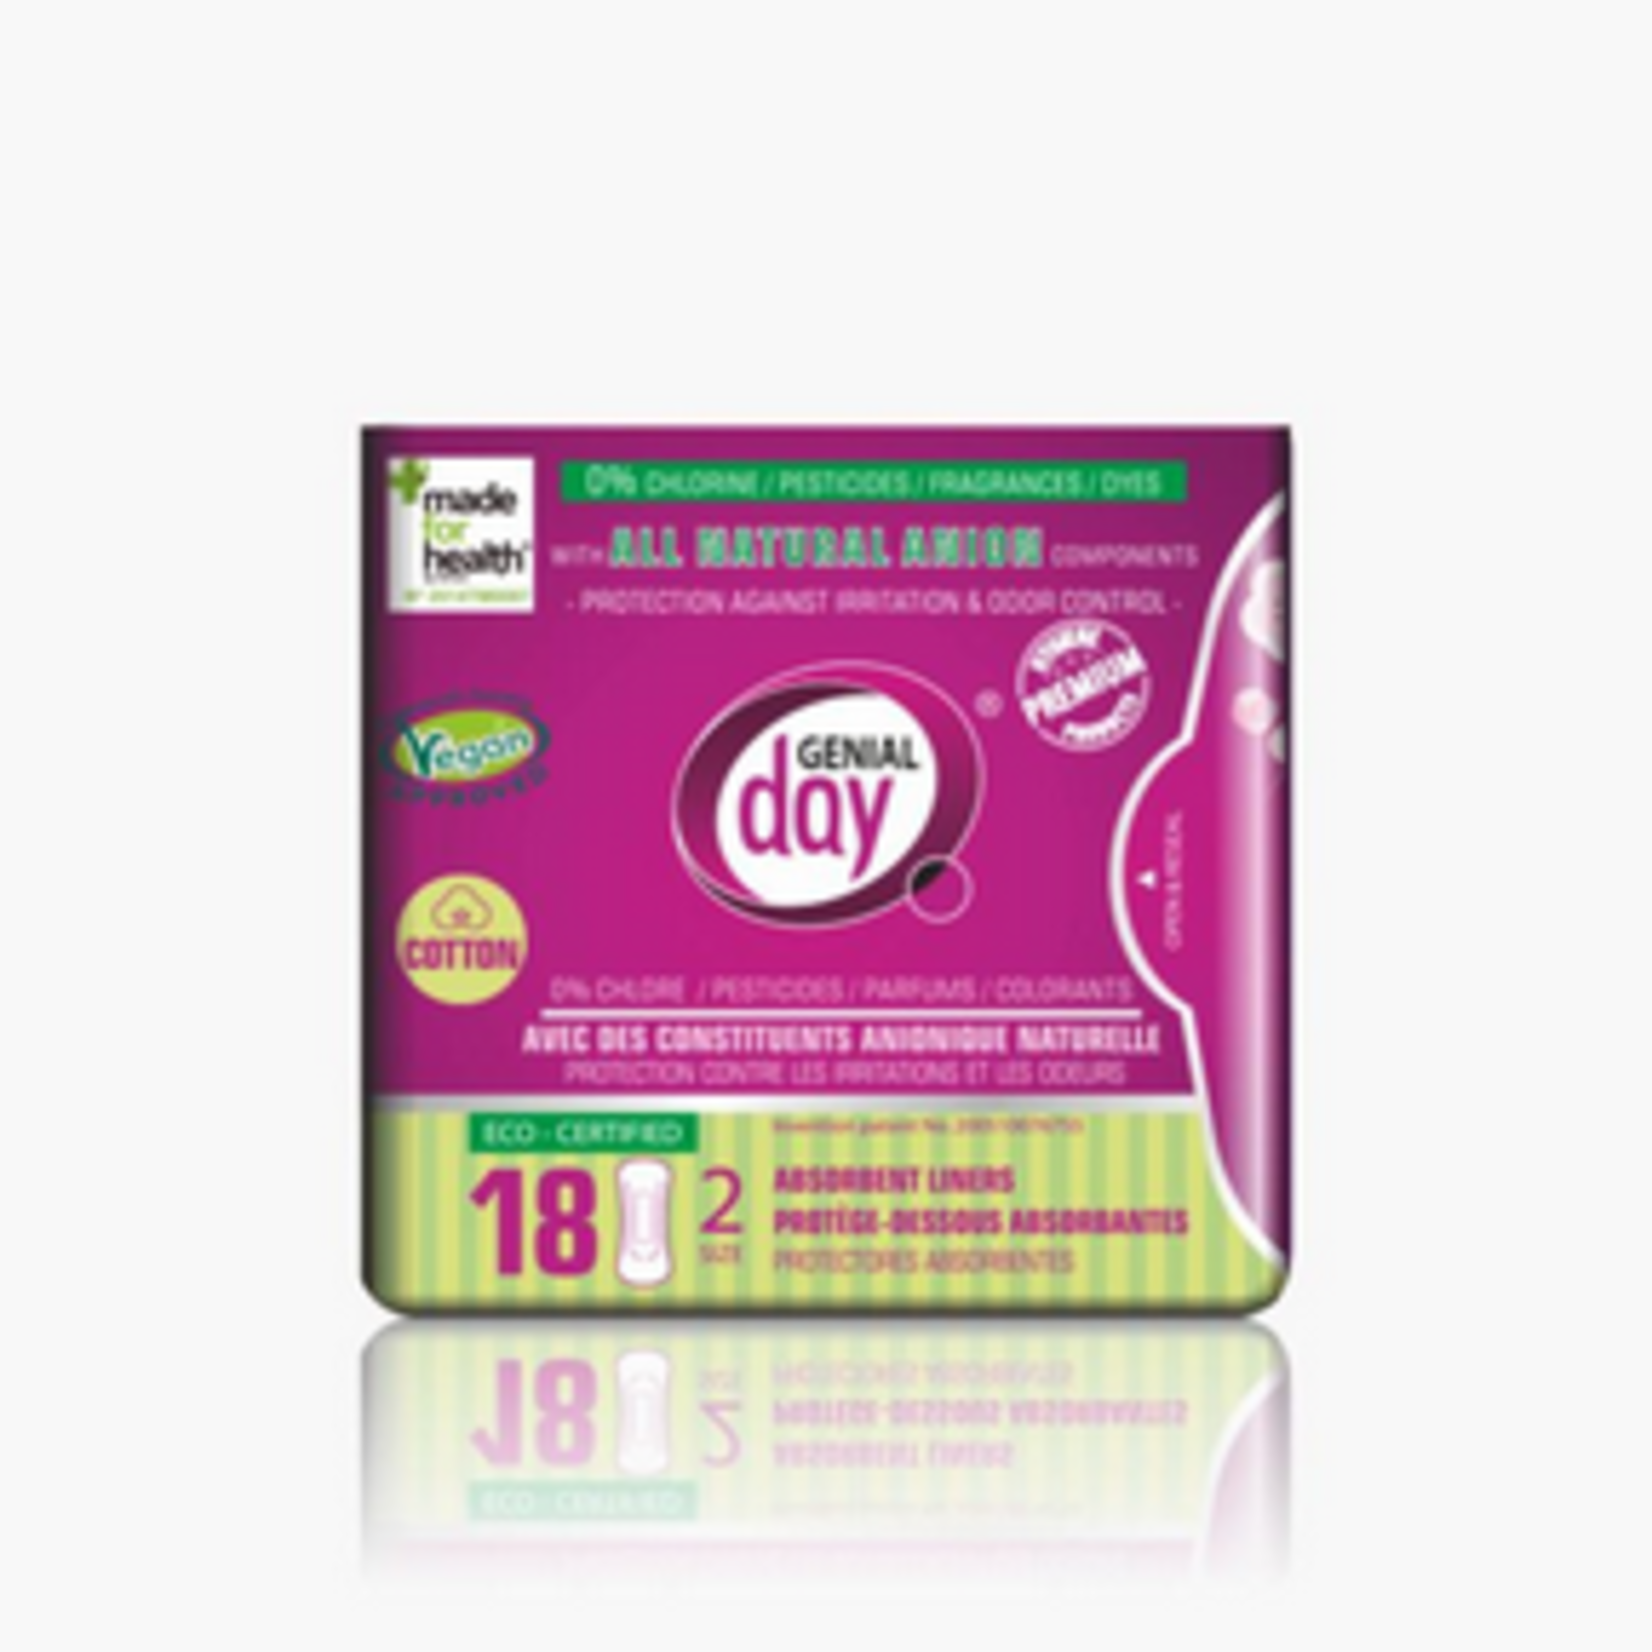 GENIAL DAY GENIAL DAY COTTON LINERS 18CT